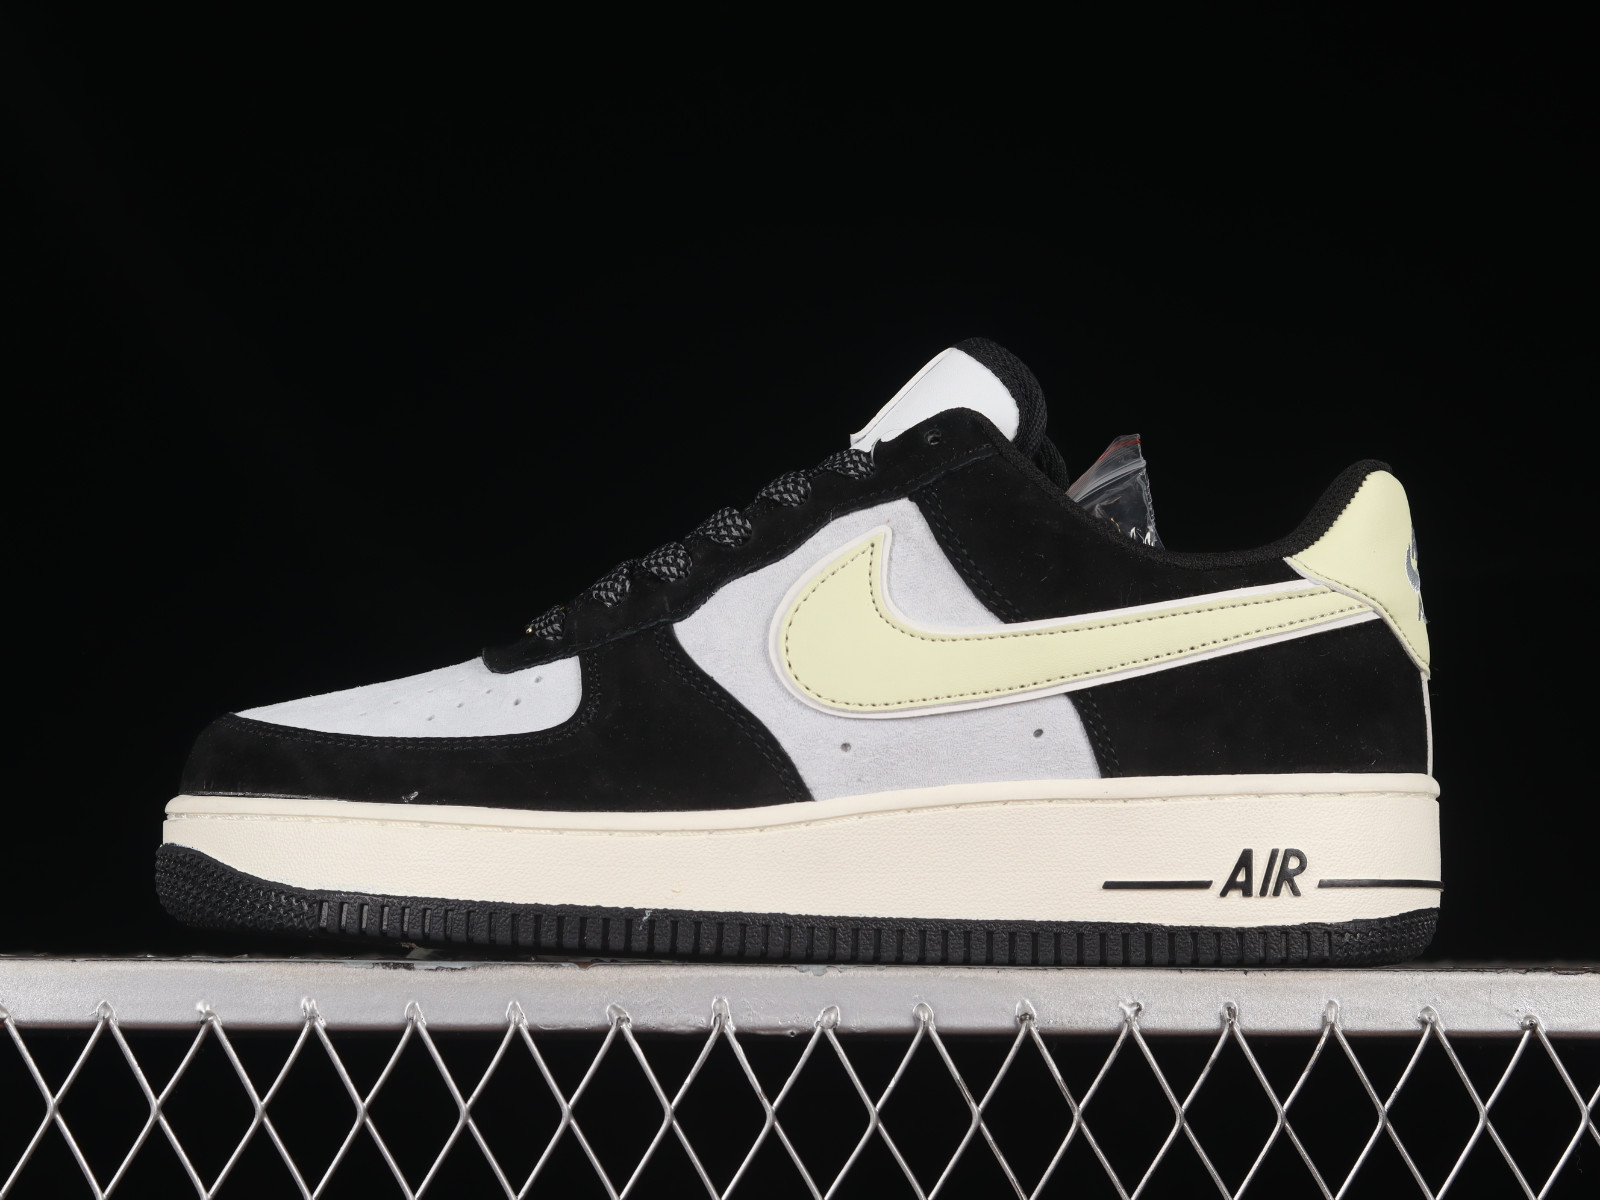 Air Force 1 07 Low Suede Cream Black White - GmarShops - 806 - Nike Air Force 1 Low Gum DJ2739-100 For Sale